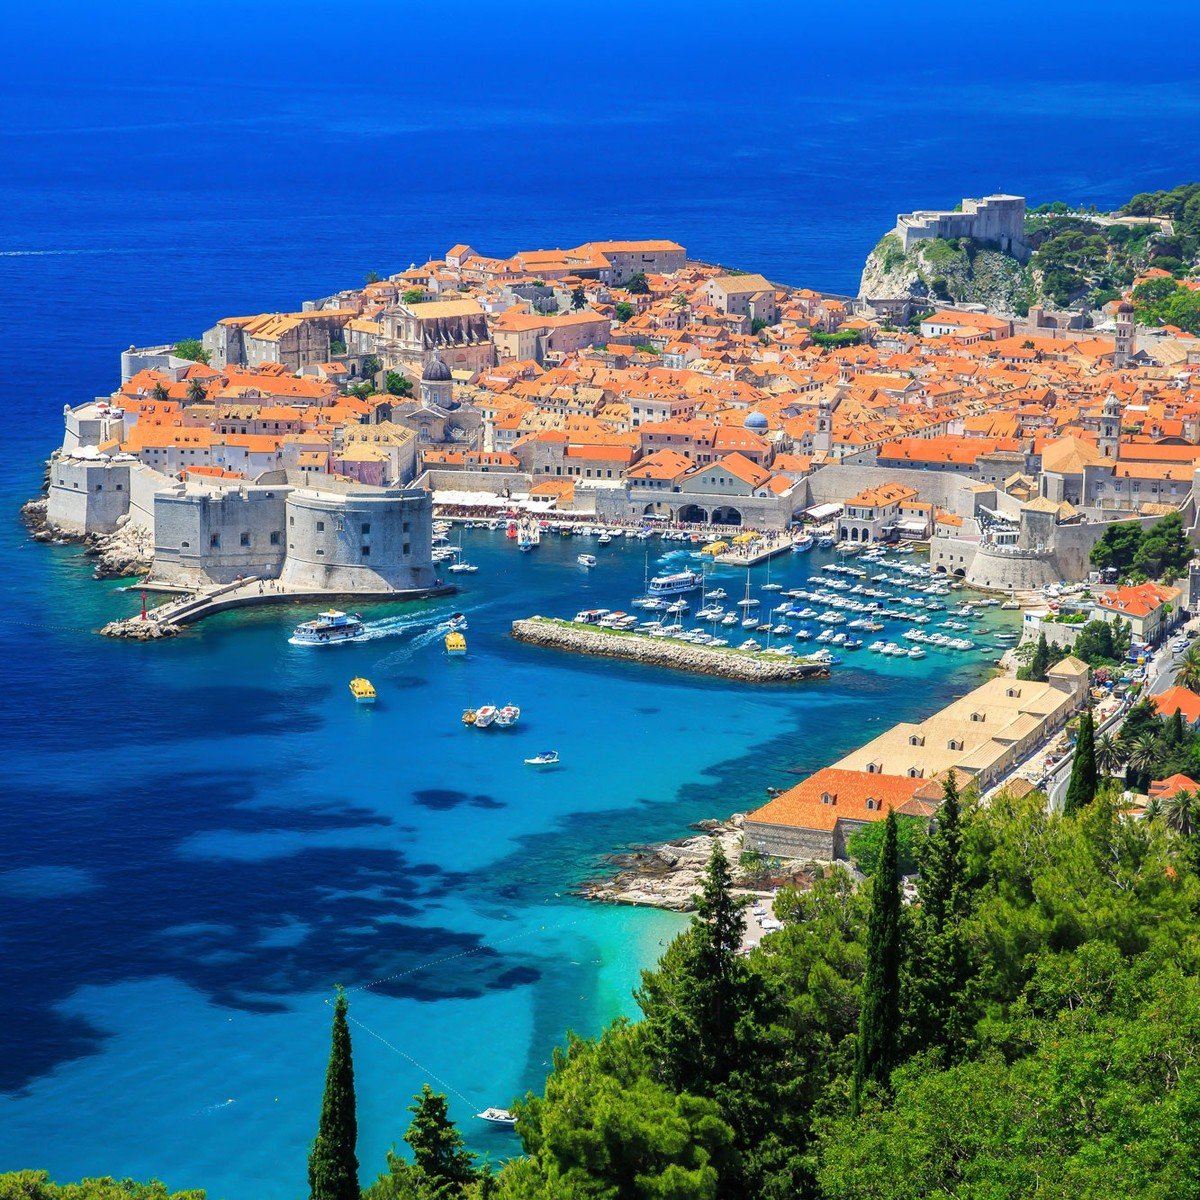 Rent catamaran or a sailboat charter from famous Dubrovnik